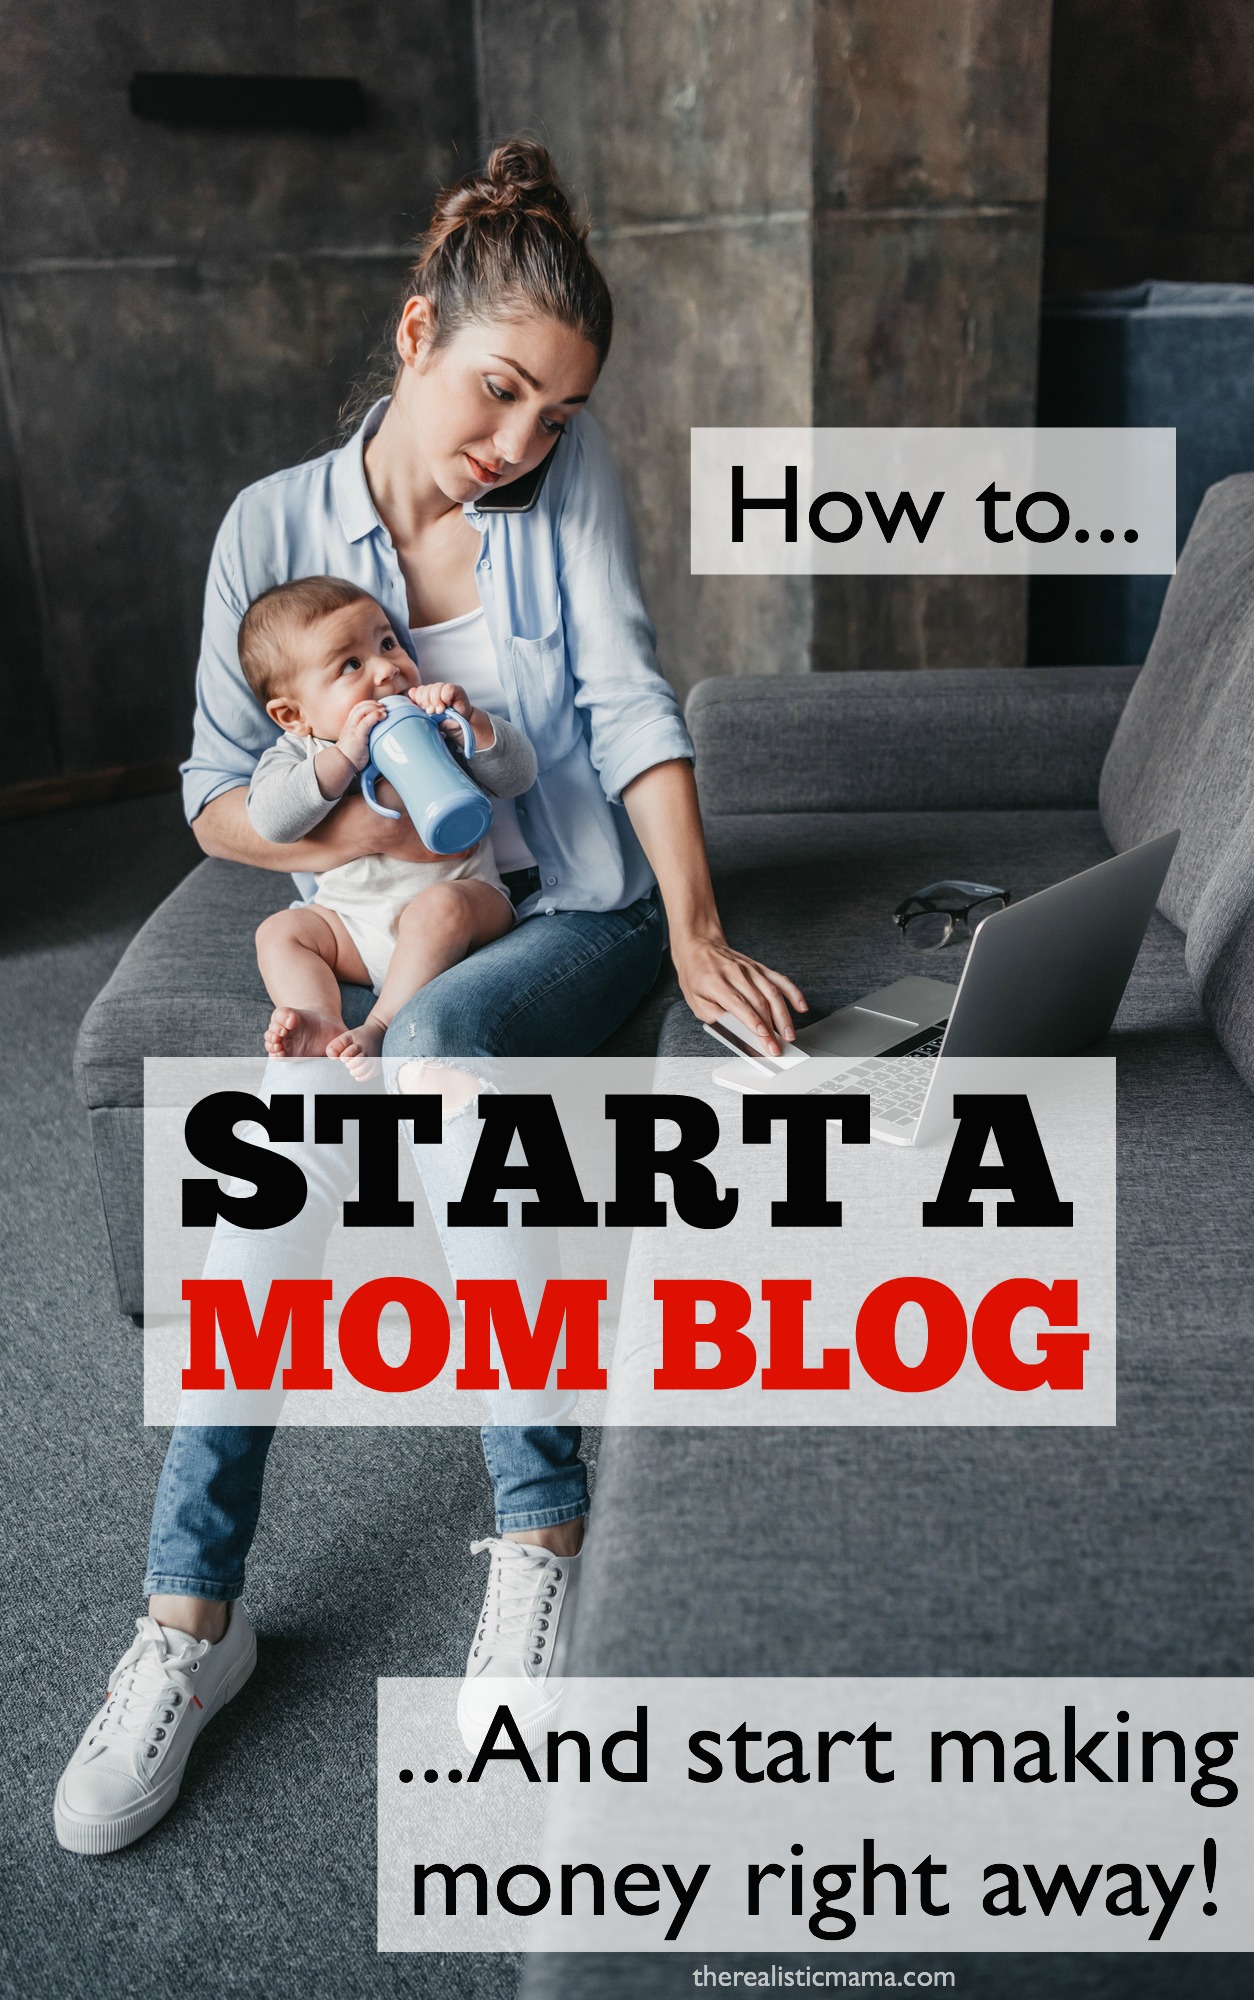 How to start a mom blog and start making money RIGHT away!